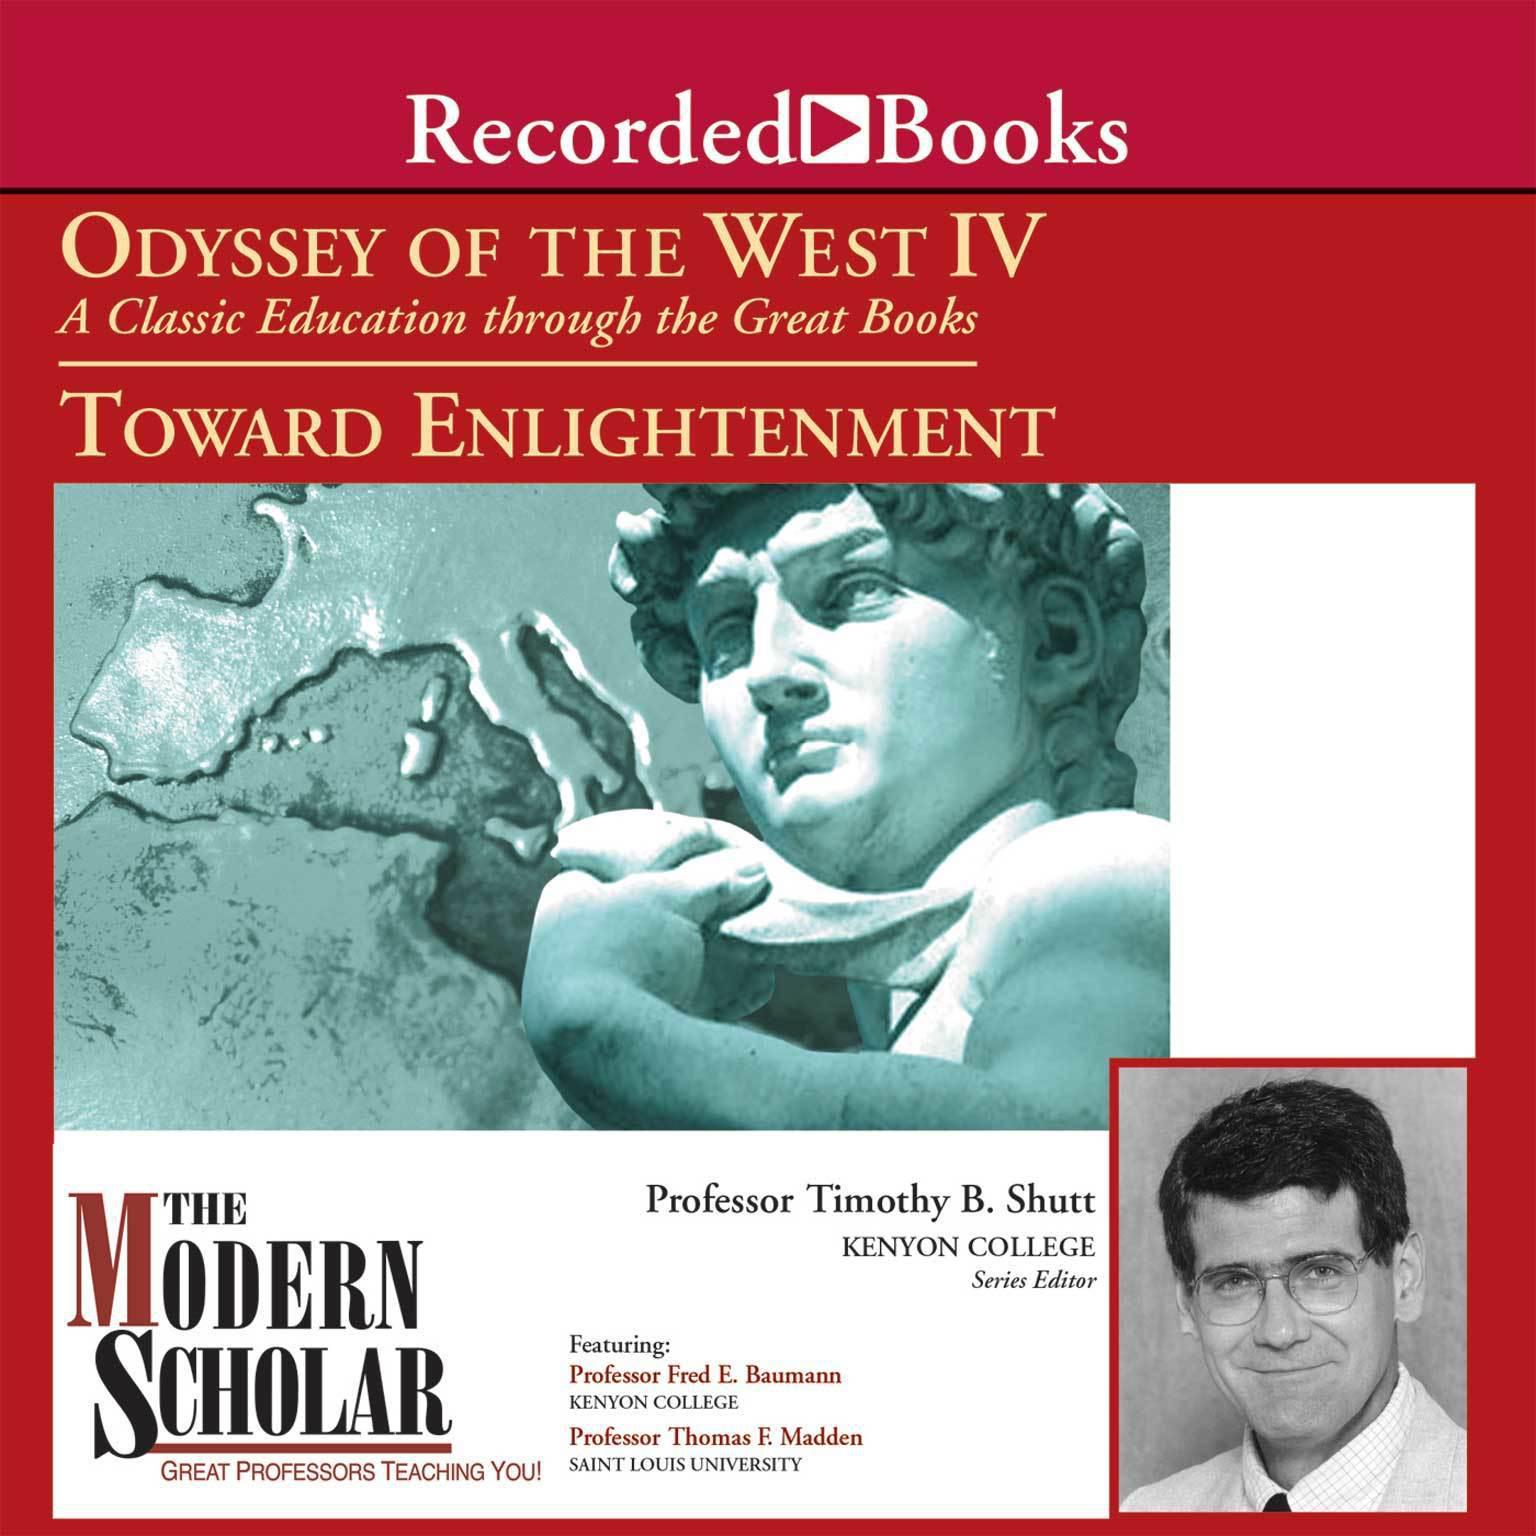 Odyssey of the West IV: A Classic Education through the Great Books: Towards Enlightenment Audiobook, by Timothy B. Shutt